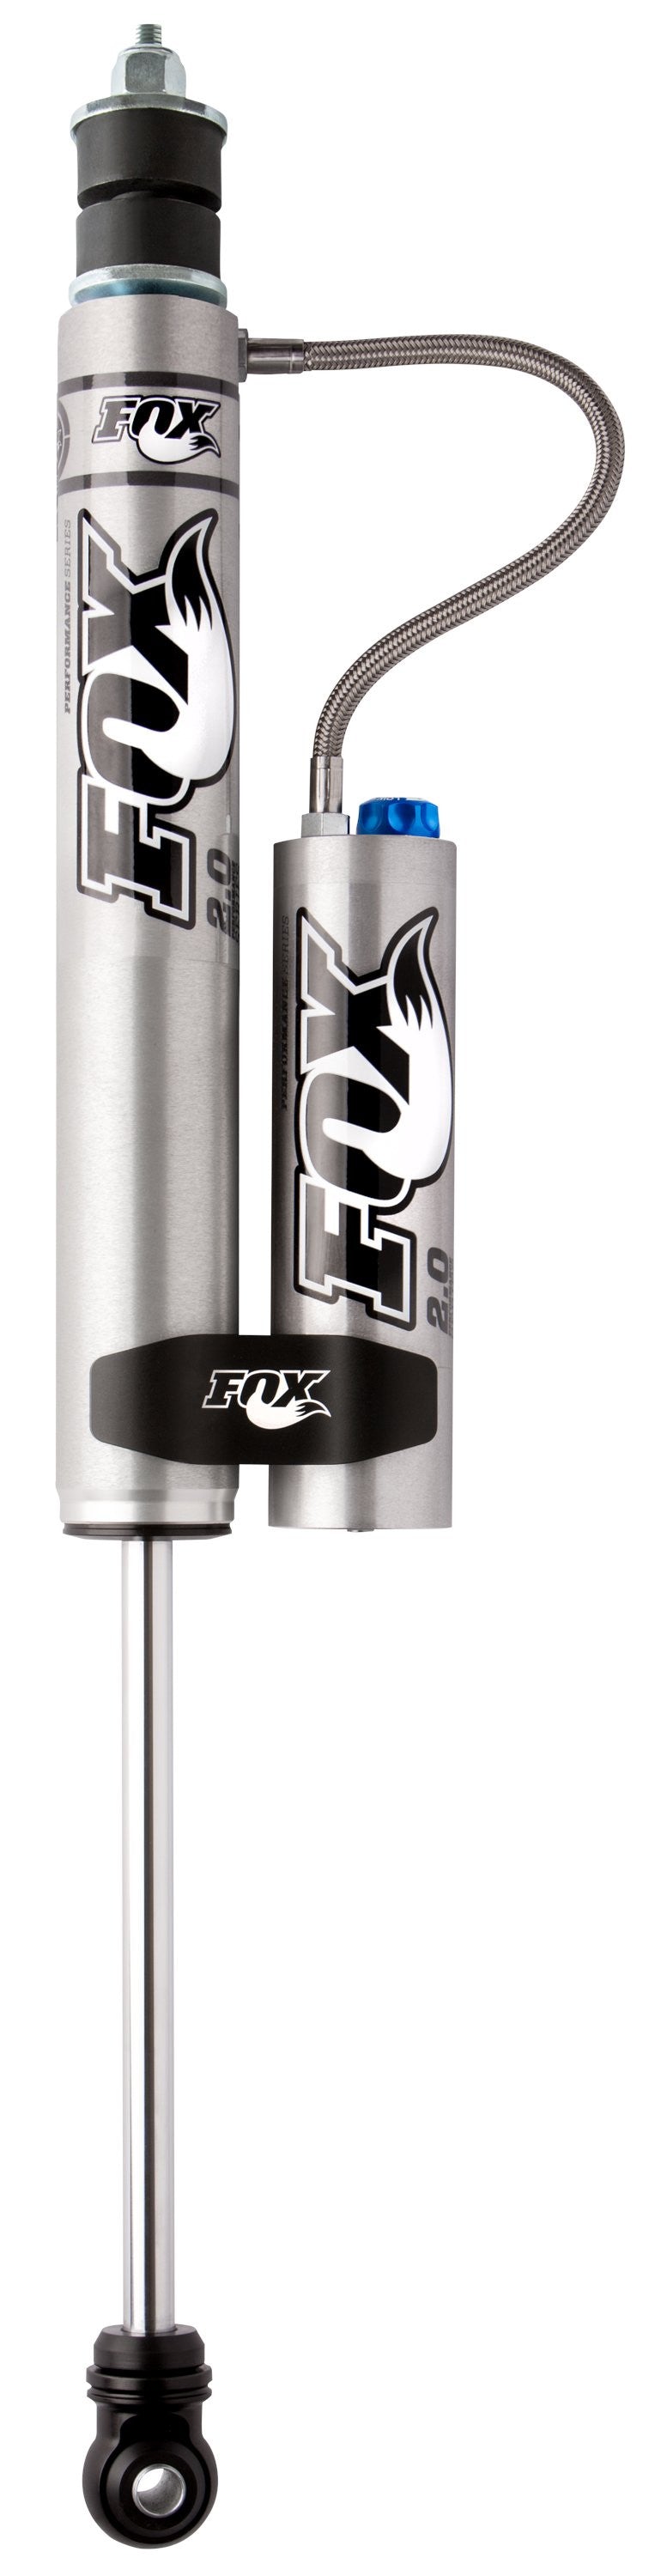 PERFORMANCE SERIES 2.0 SMOOTH BODY RESERVOIR SHOCK - ADJUSTABLE Lift: 7-9; Includes Billet Reservoir Clamp I Does not fit magnetic suspension 2011-2019 GMC Sierra 3500 HD FOX-980-26-968 - 2.0 SHOCK - FOX Offroad Shocks - Texas Complete Truck Center